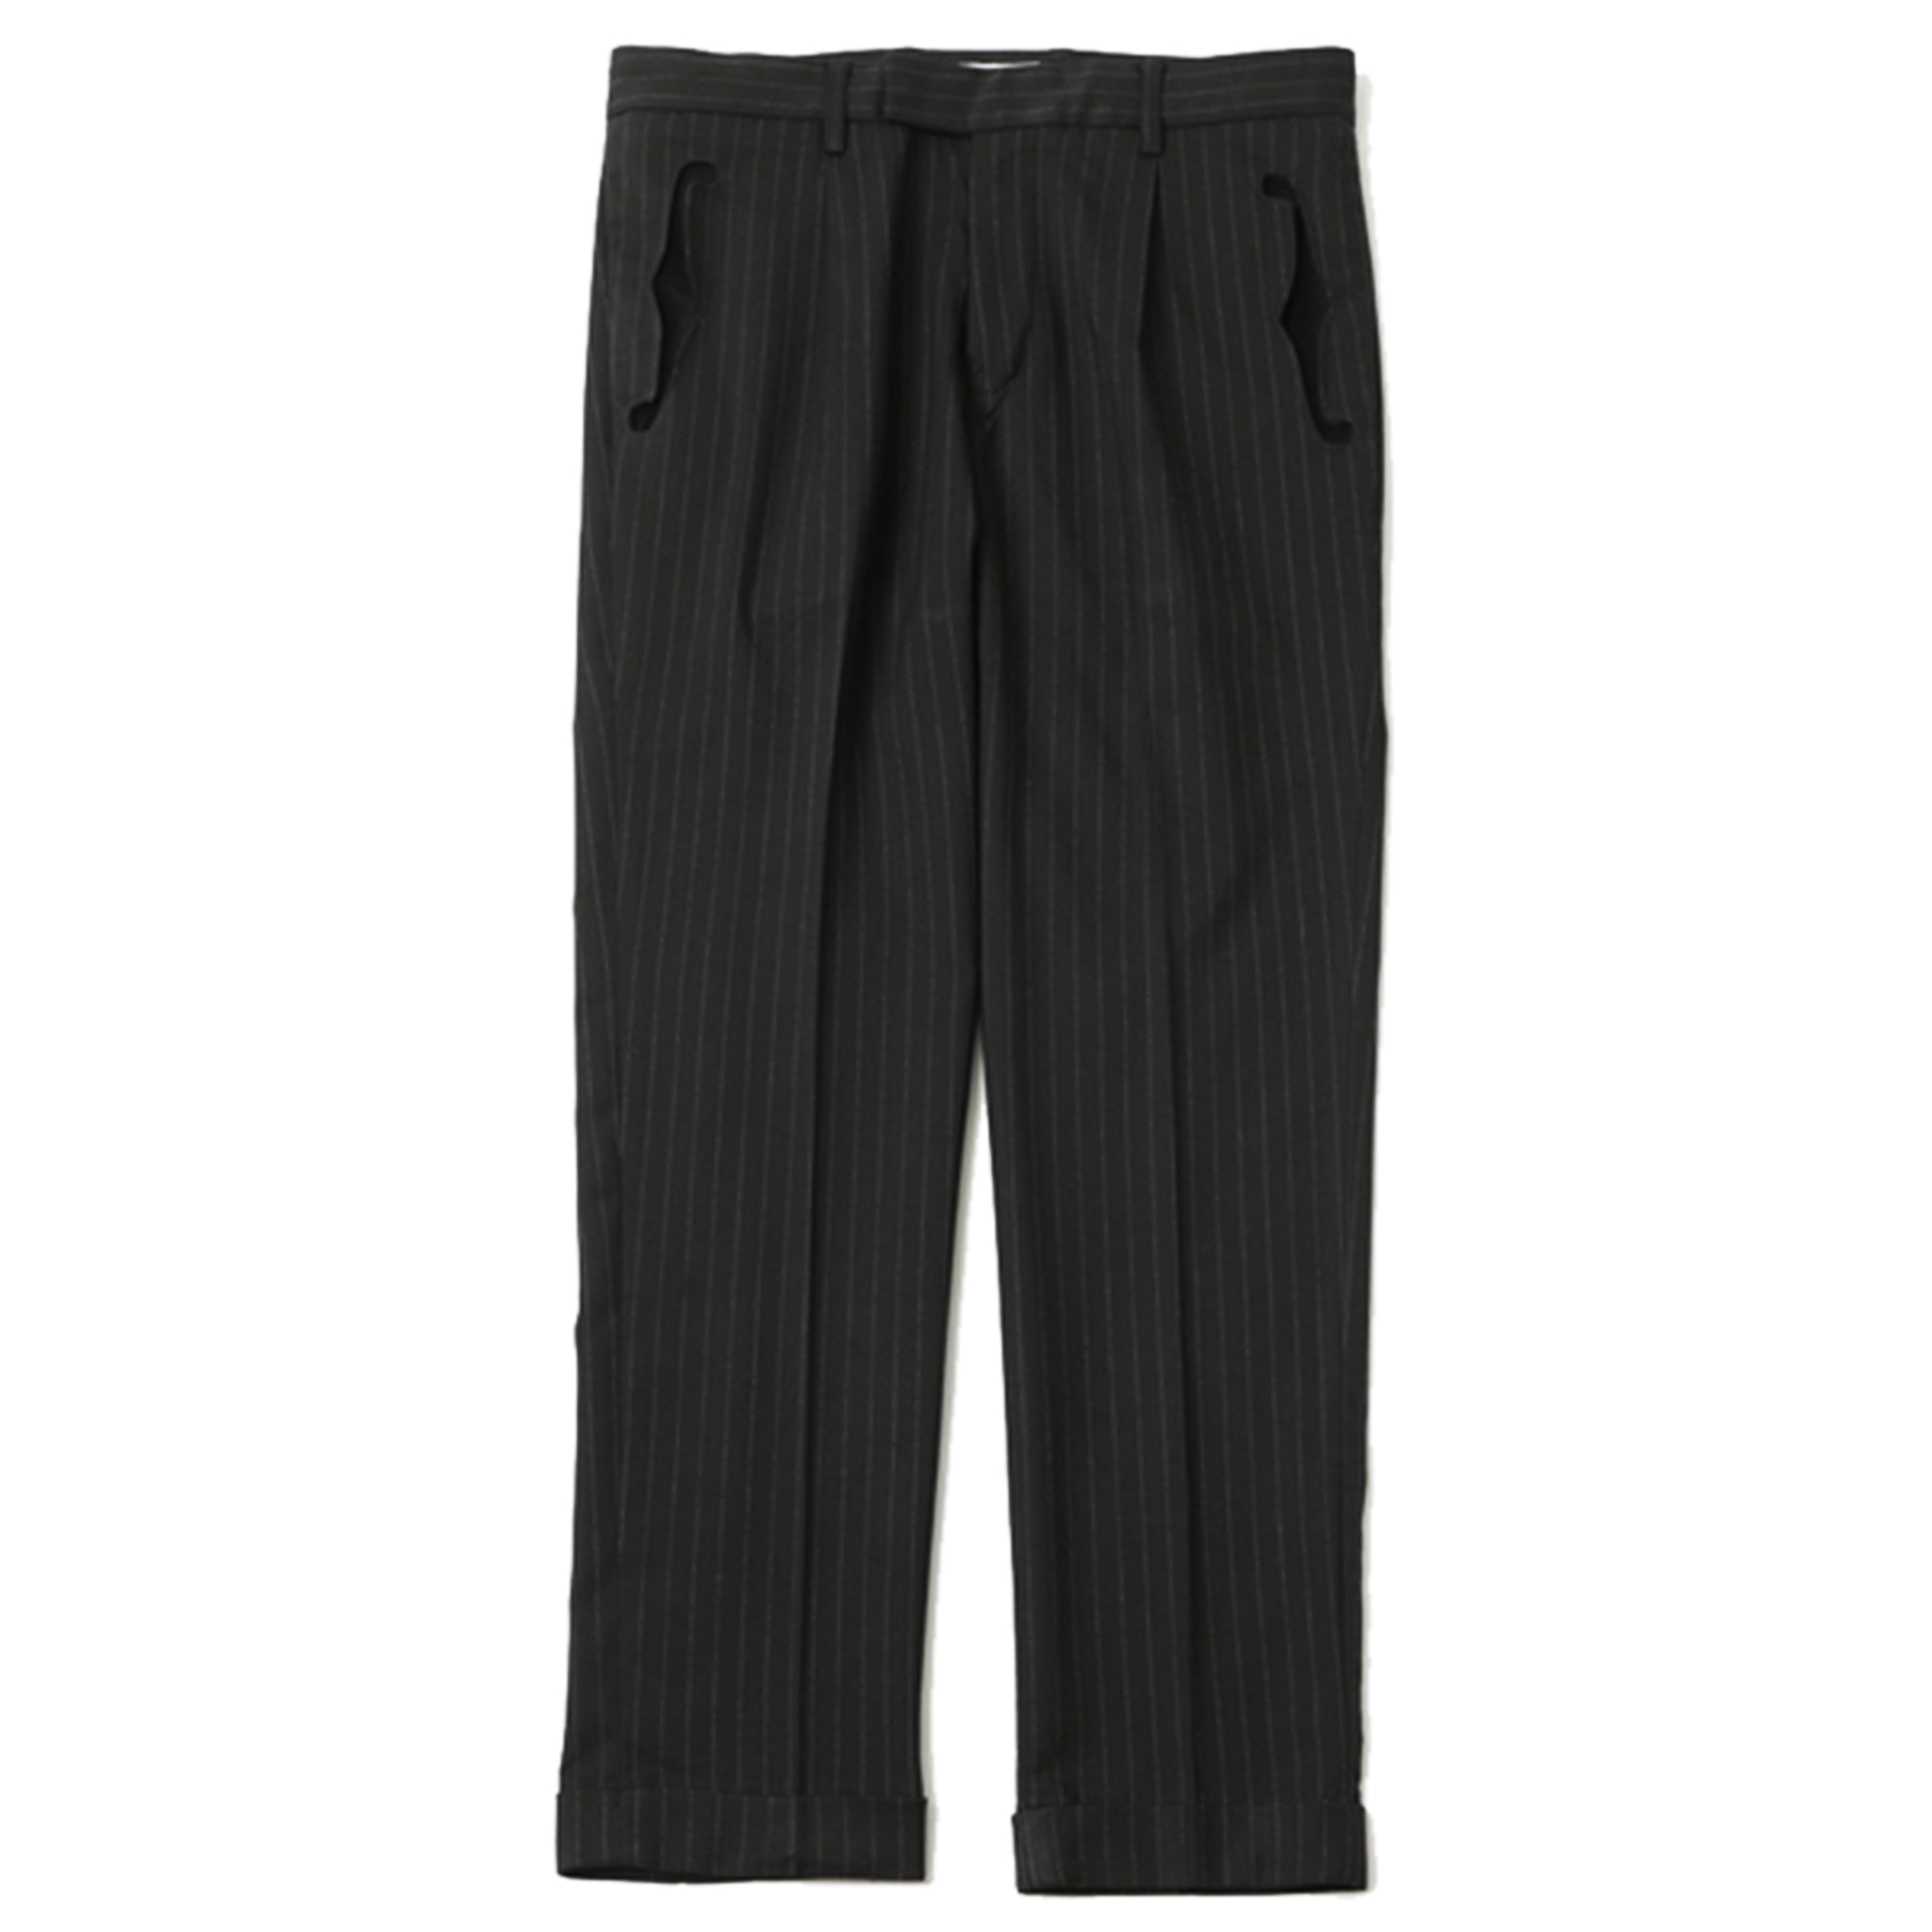 RUDE GALLERY - F HOLE PIN STRIPE TROUSERS at Mannahatta NYC